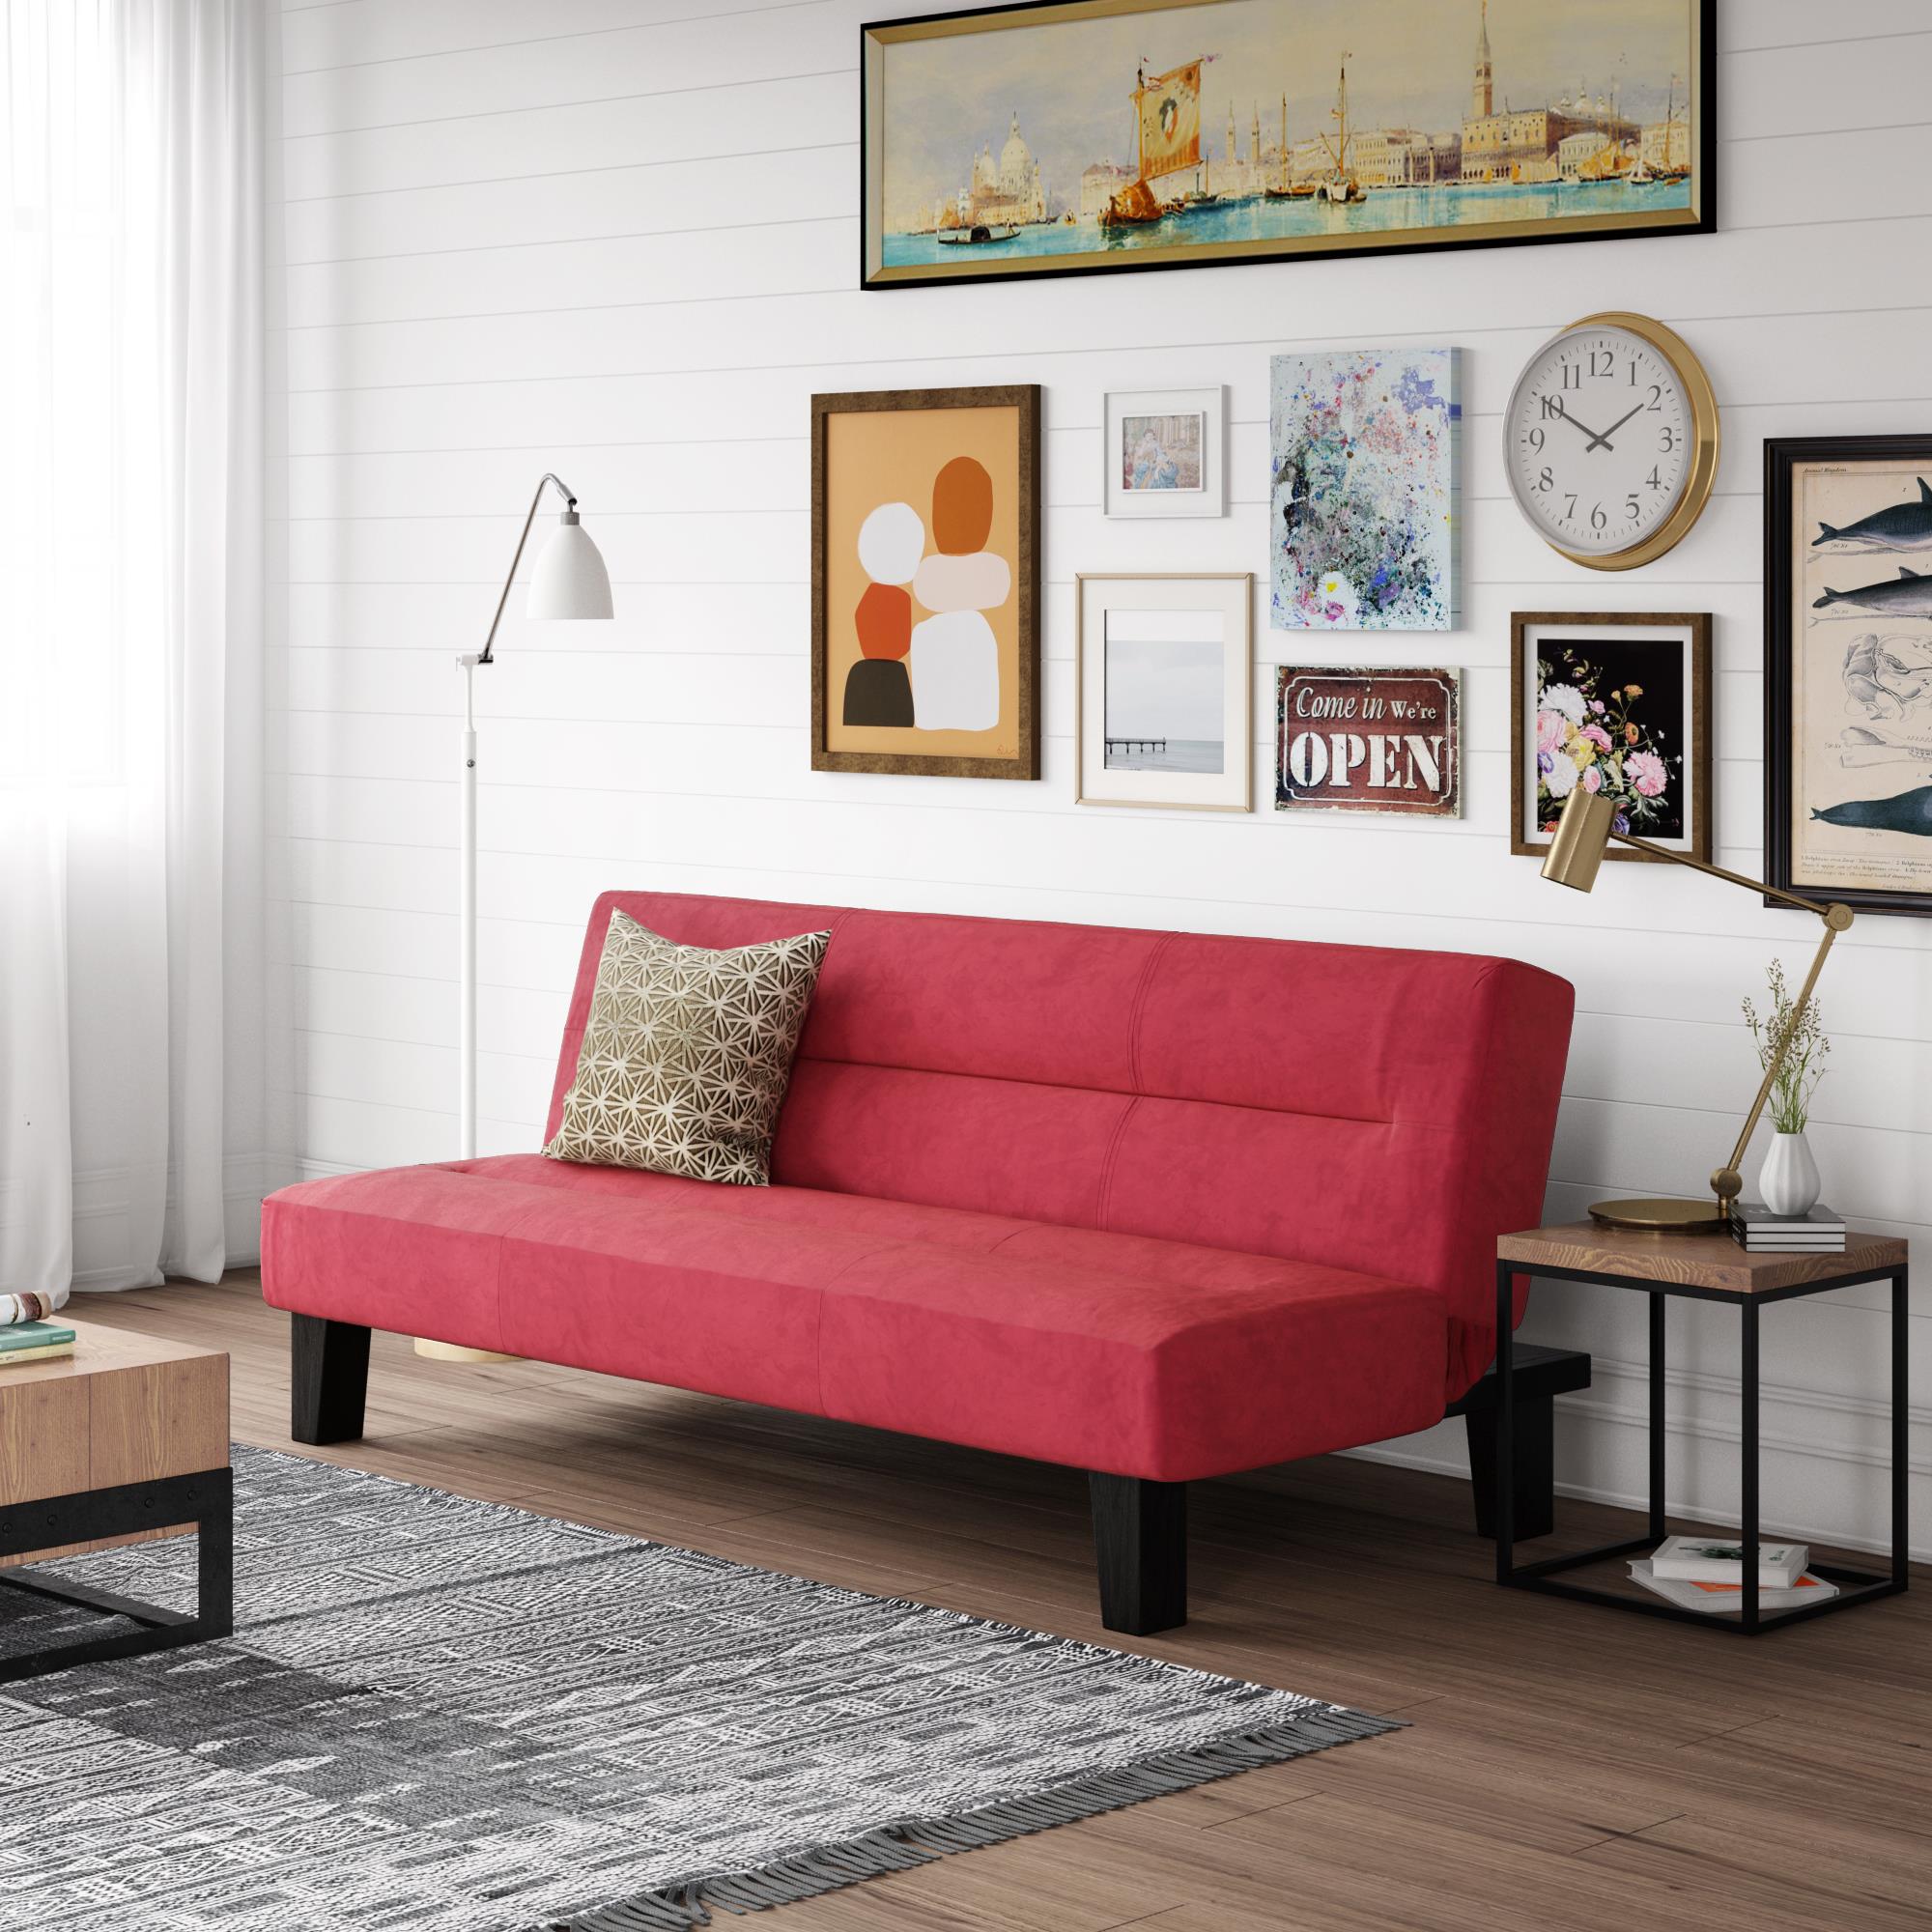 DHP Kebo Futon with Microfiber Cover, Red - image 1 of 13